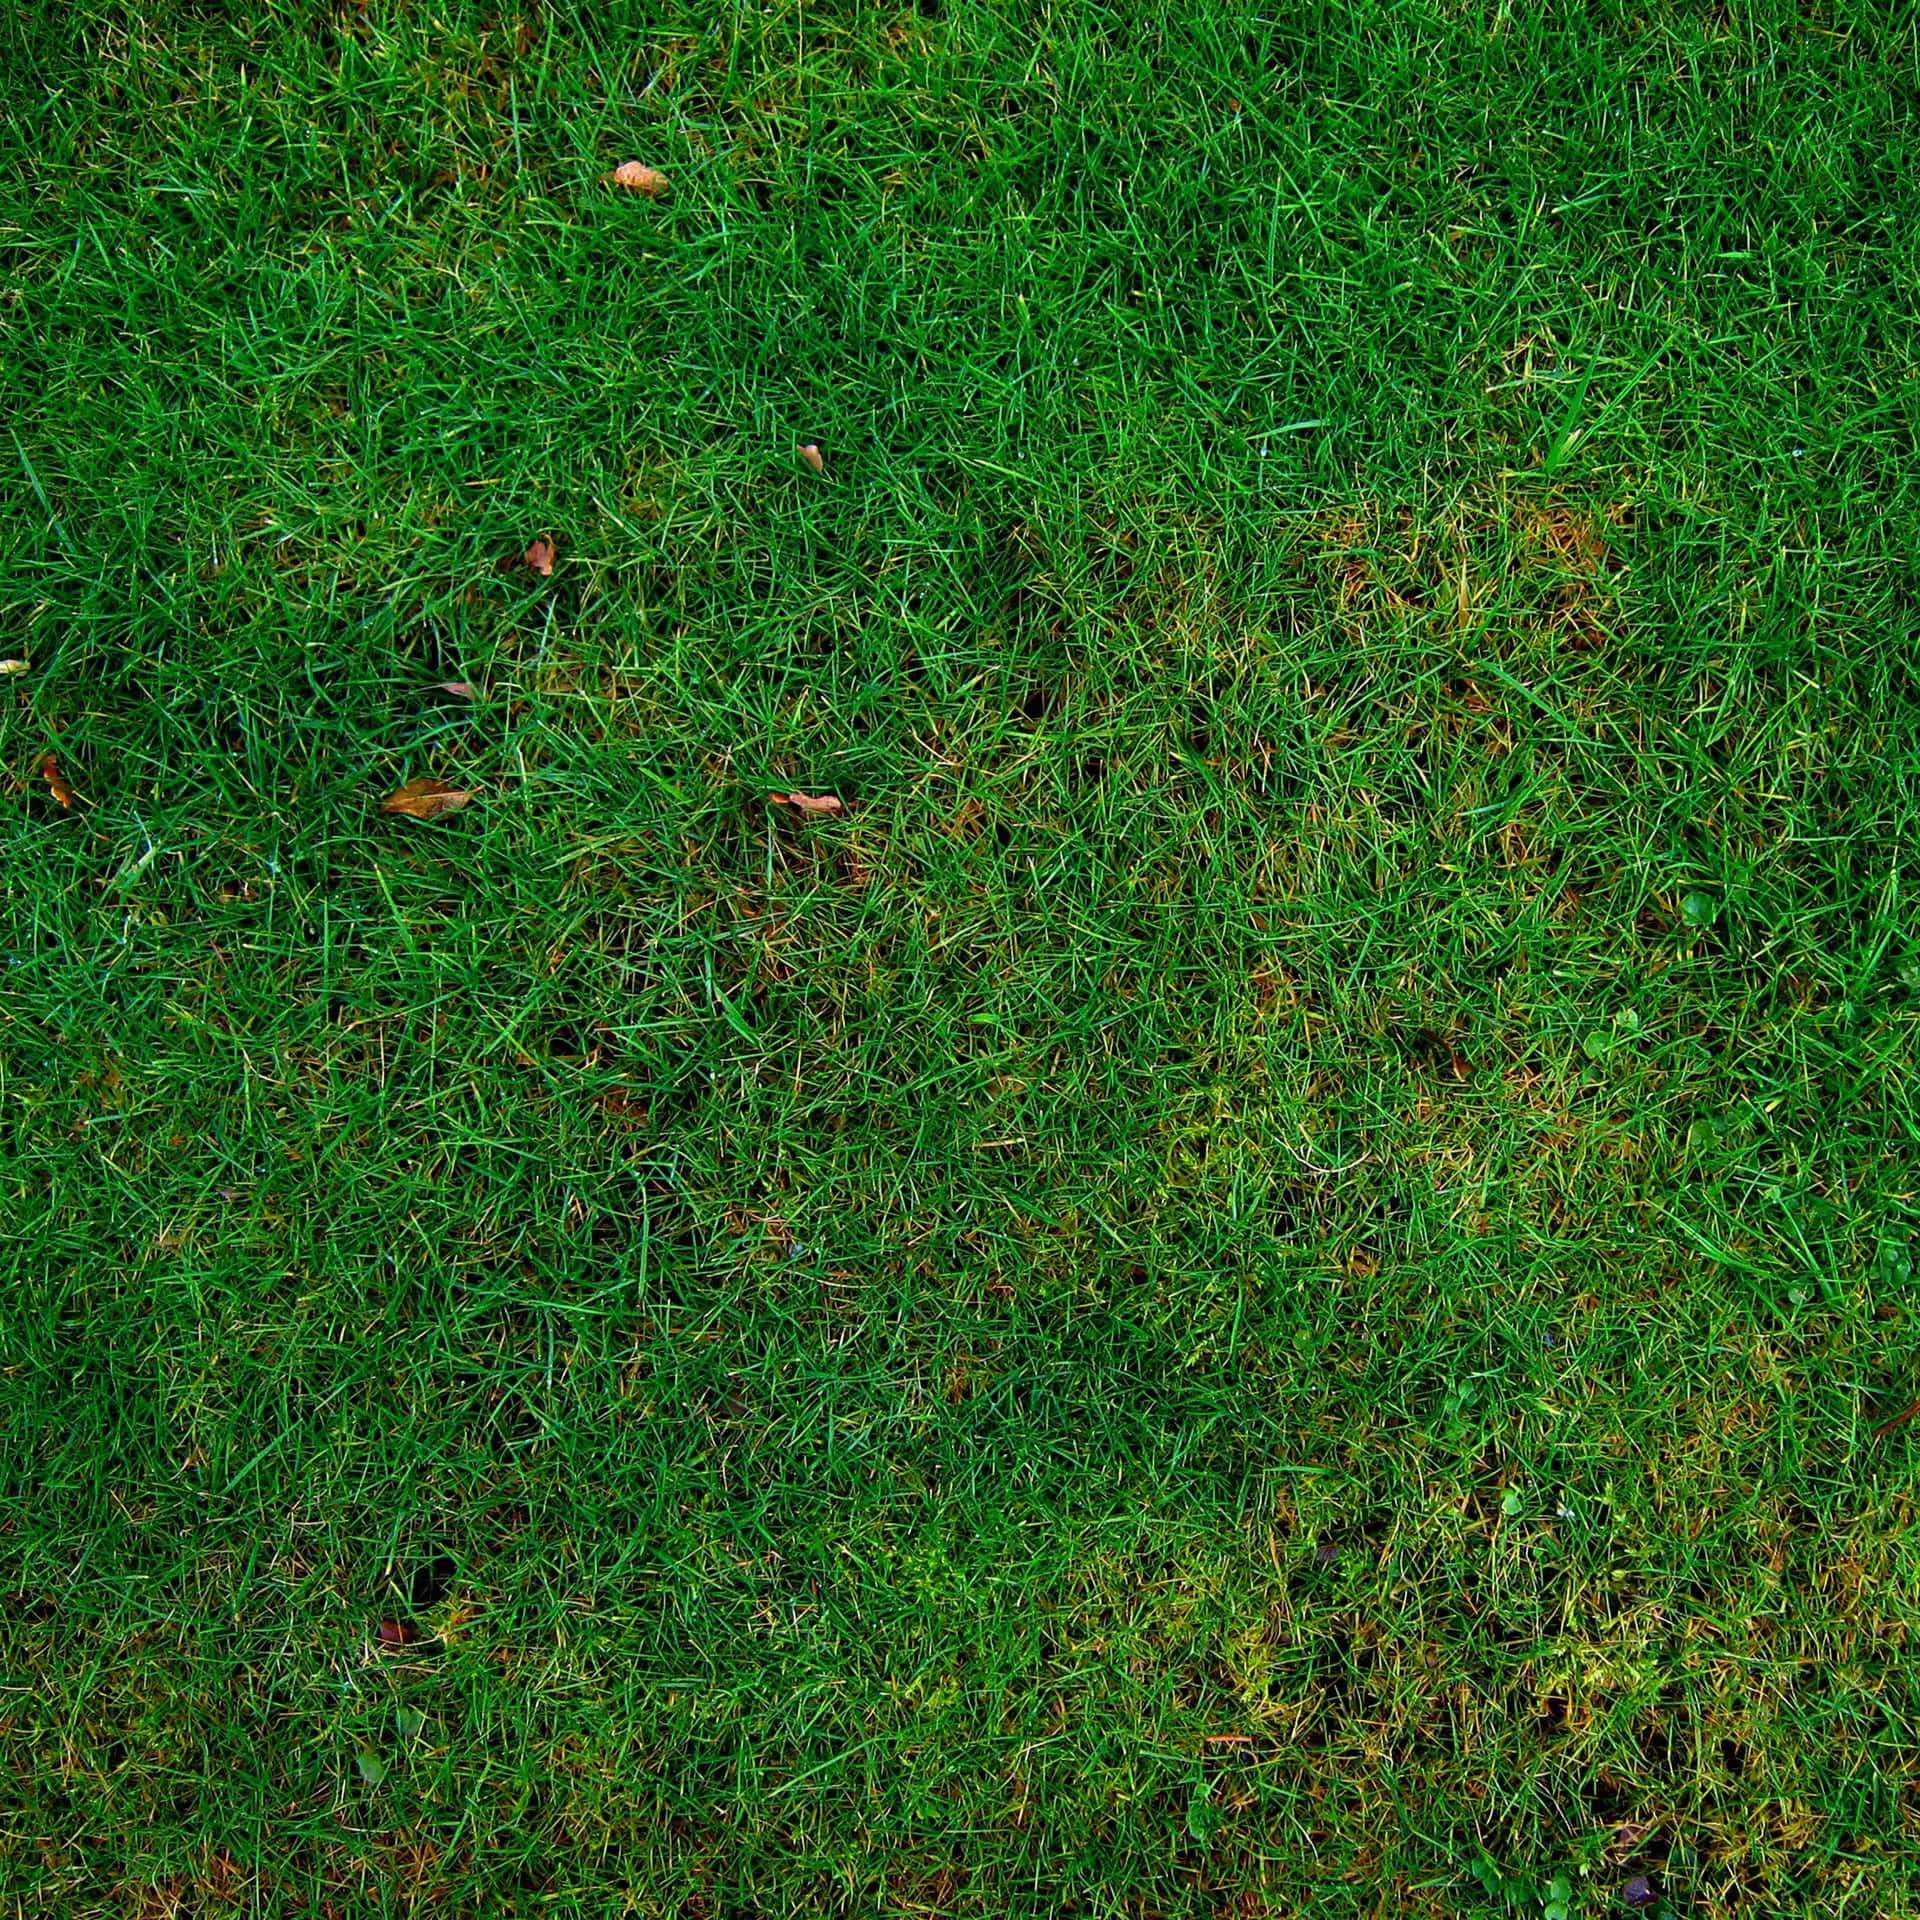 Fresh, green grass texture in a vibrant outdoor setting